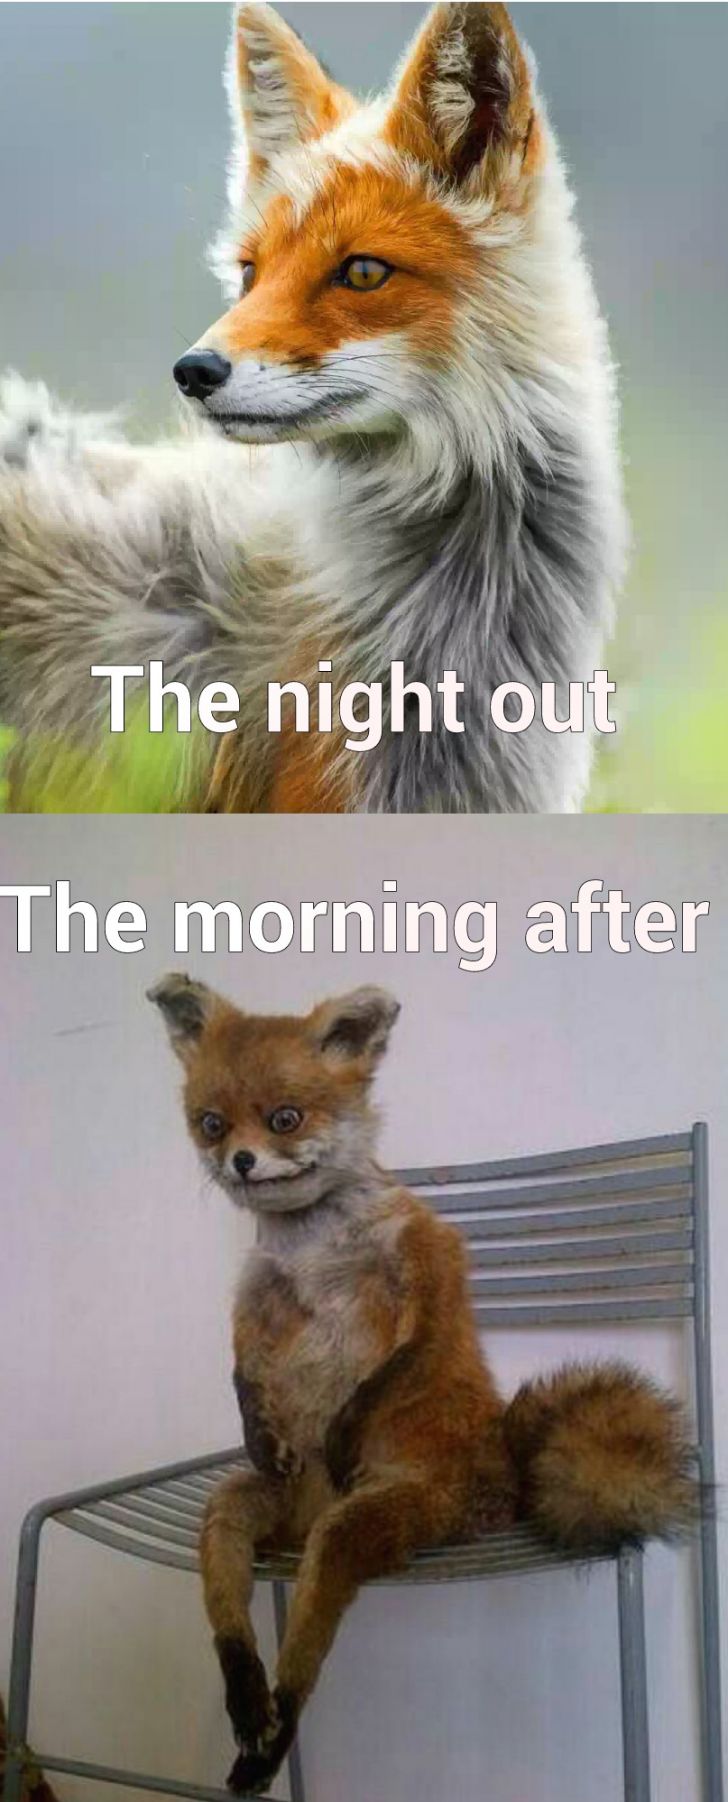 The night out Vs The morning after